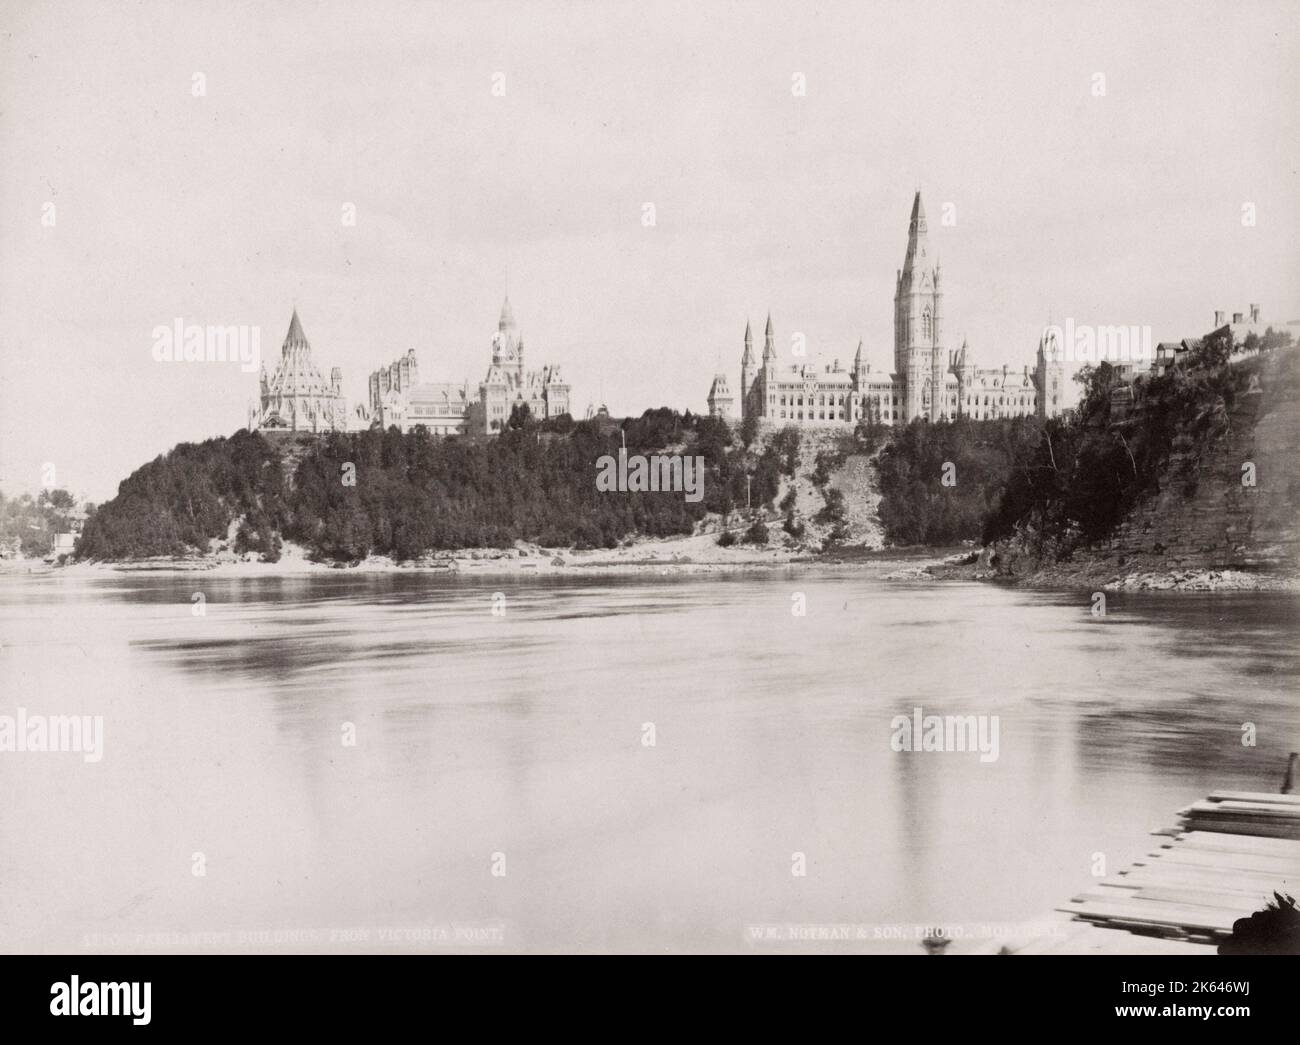 c.1900 vintage photograph: Parliament Buildings from Victoria Point, Ottawa, Canada. William Notman photograph. Stock Photo